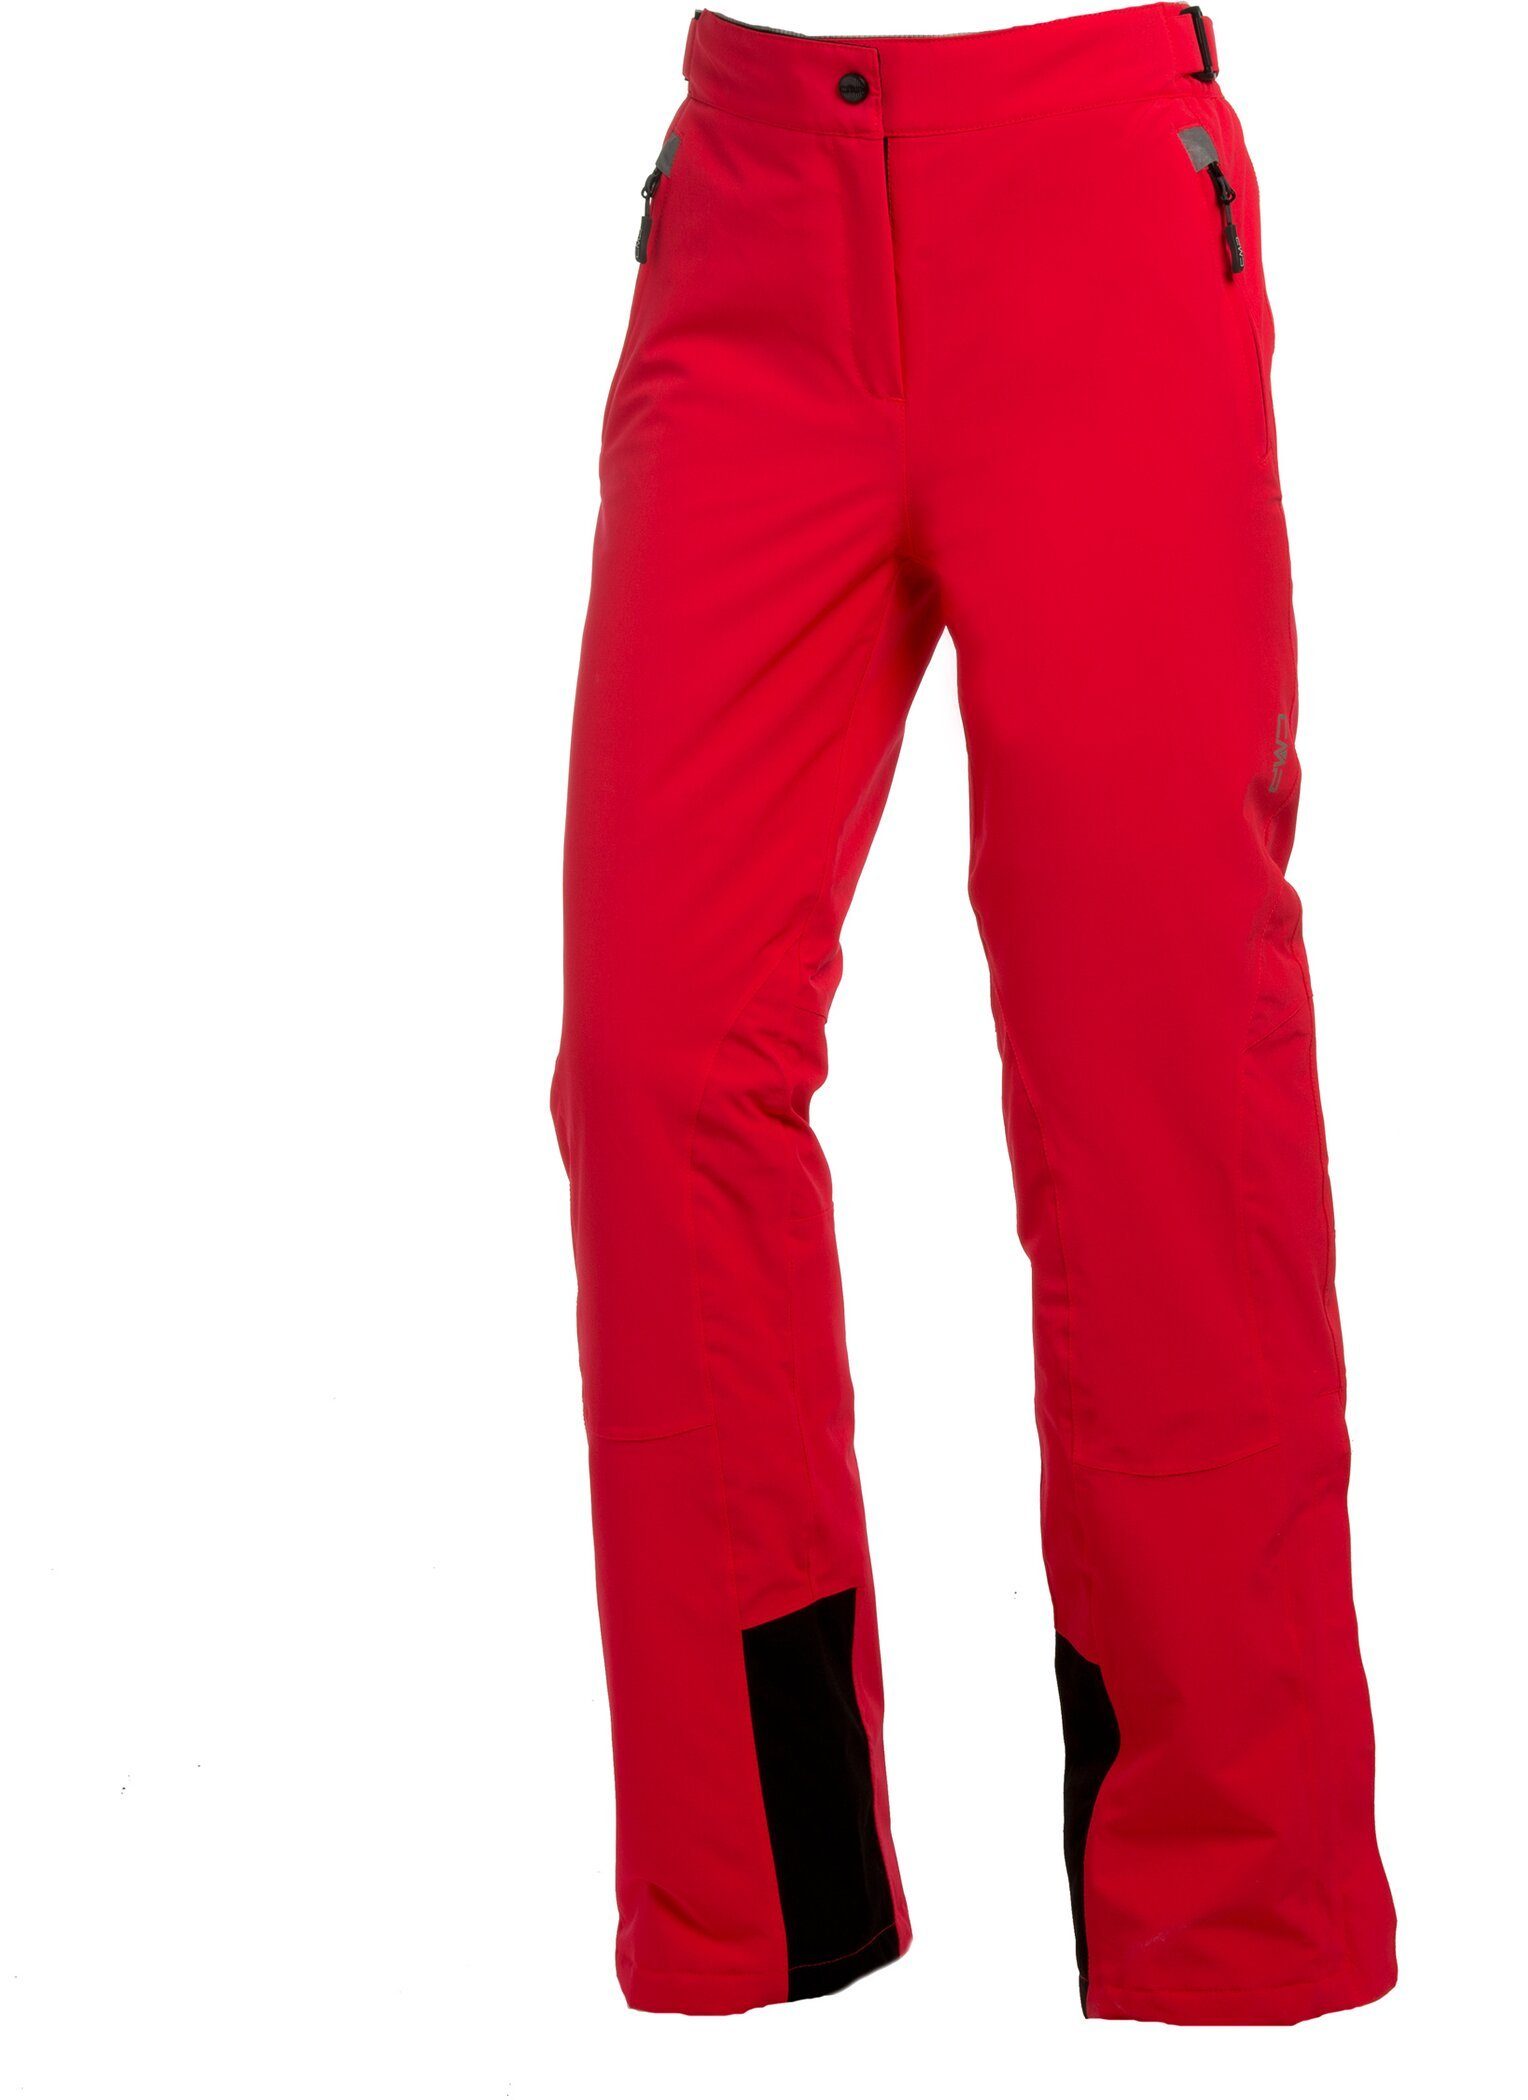 FLUO RED PANT WOMAN CMP C649 Skihose